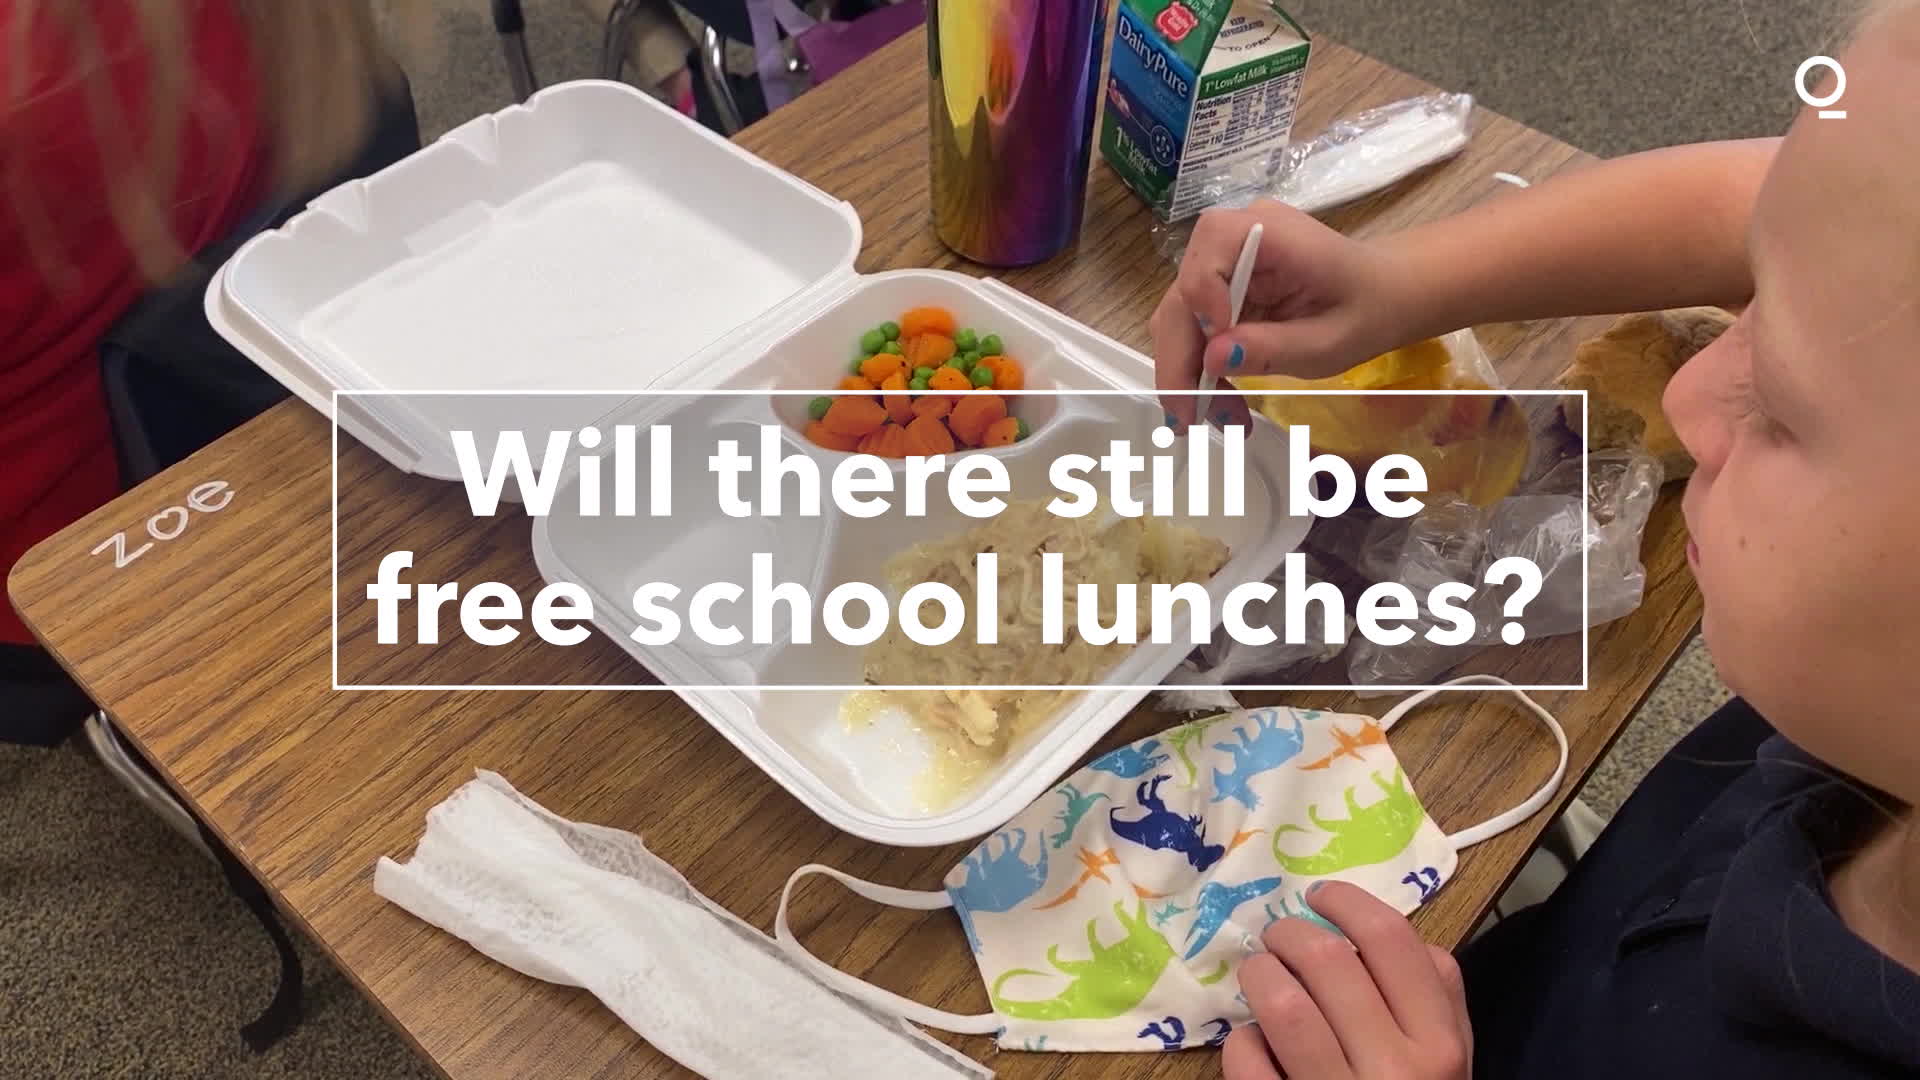 Watch Will there still be free school lunches? Bloomberg